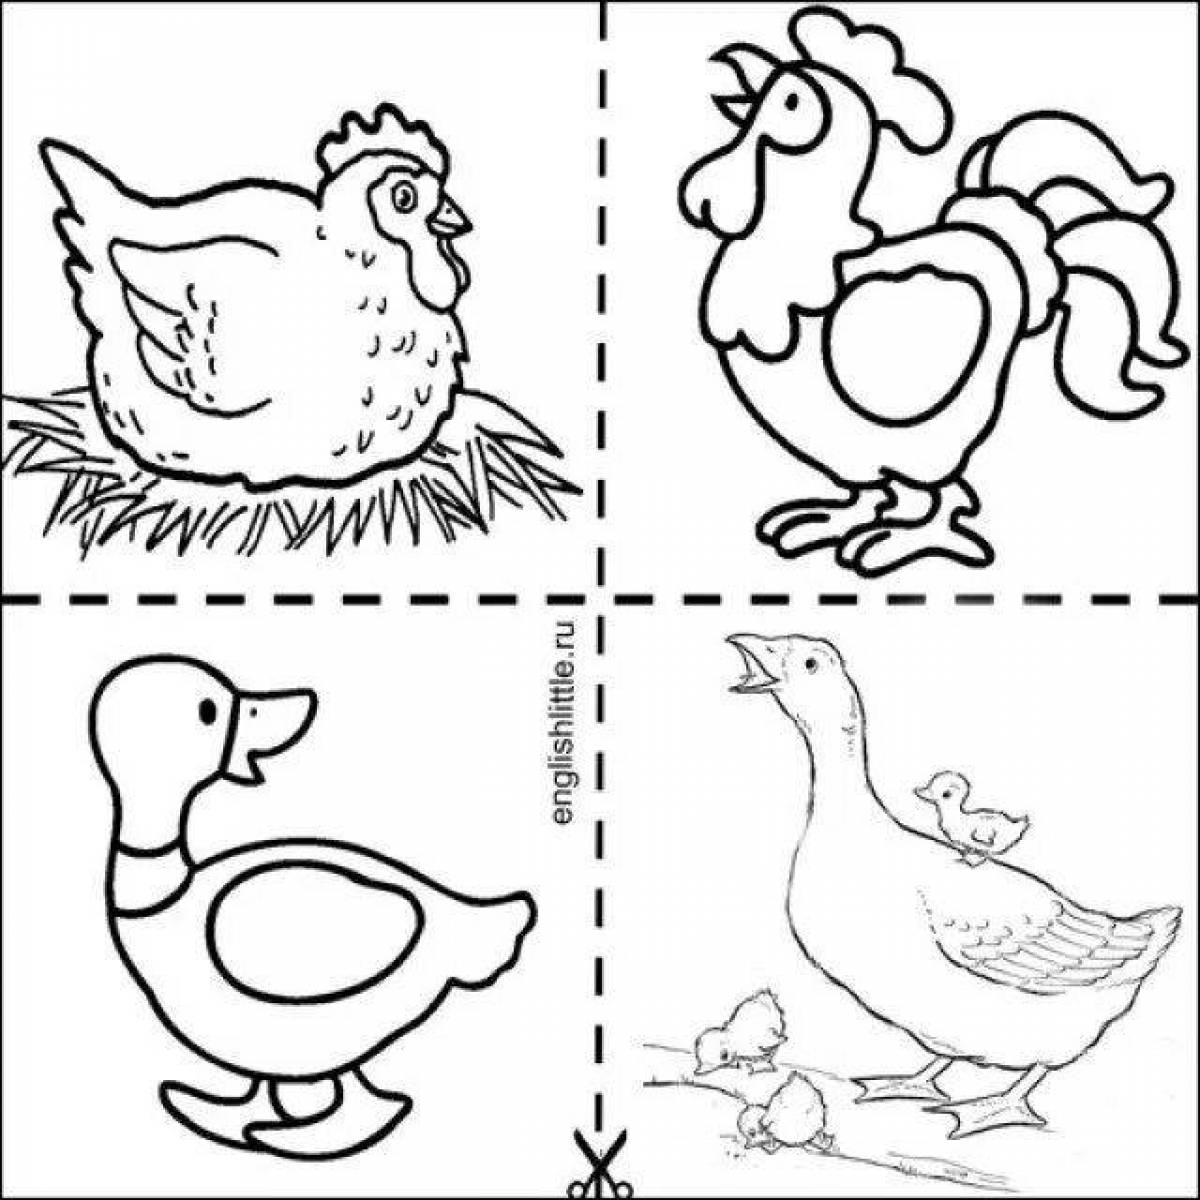 Violent coloring pages of pets for children 5-6 years old